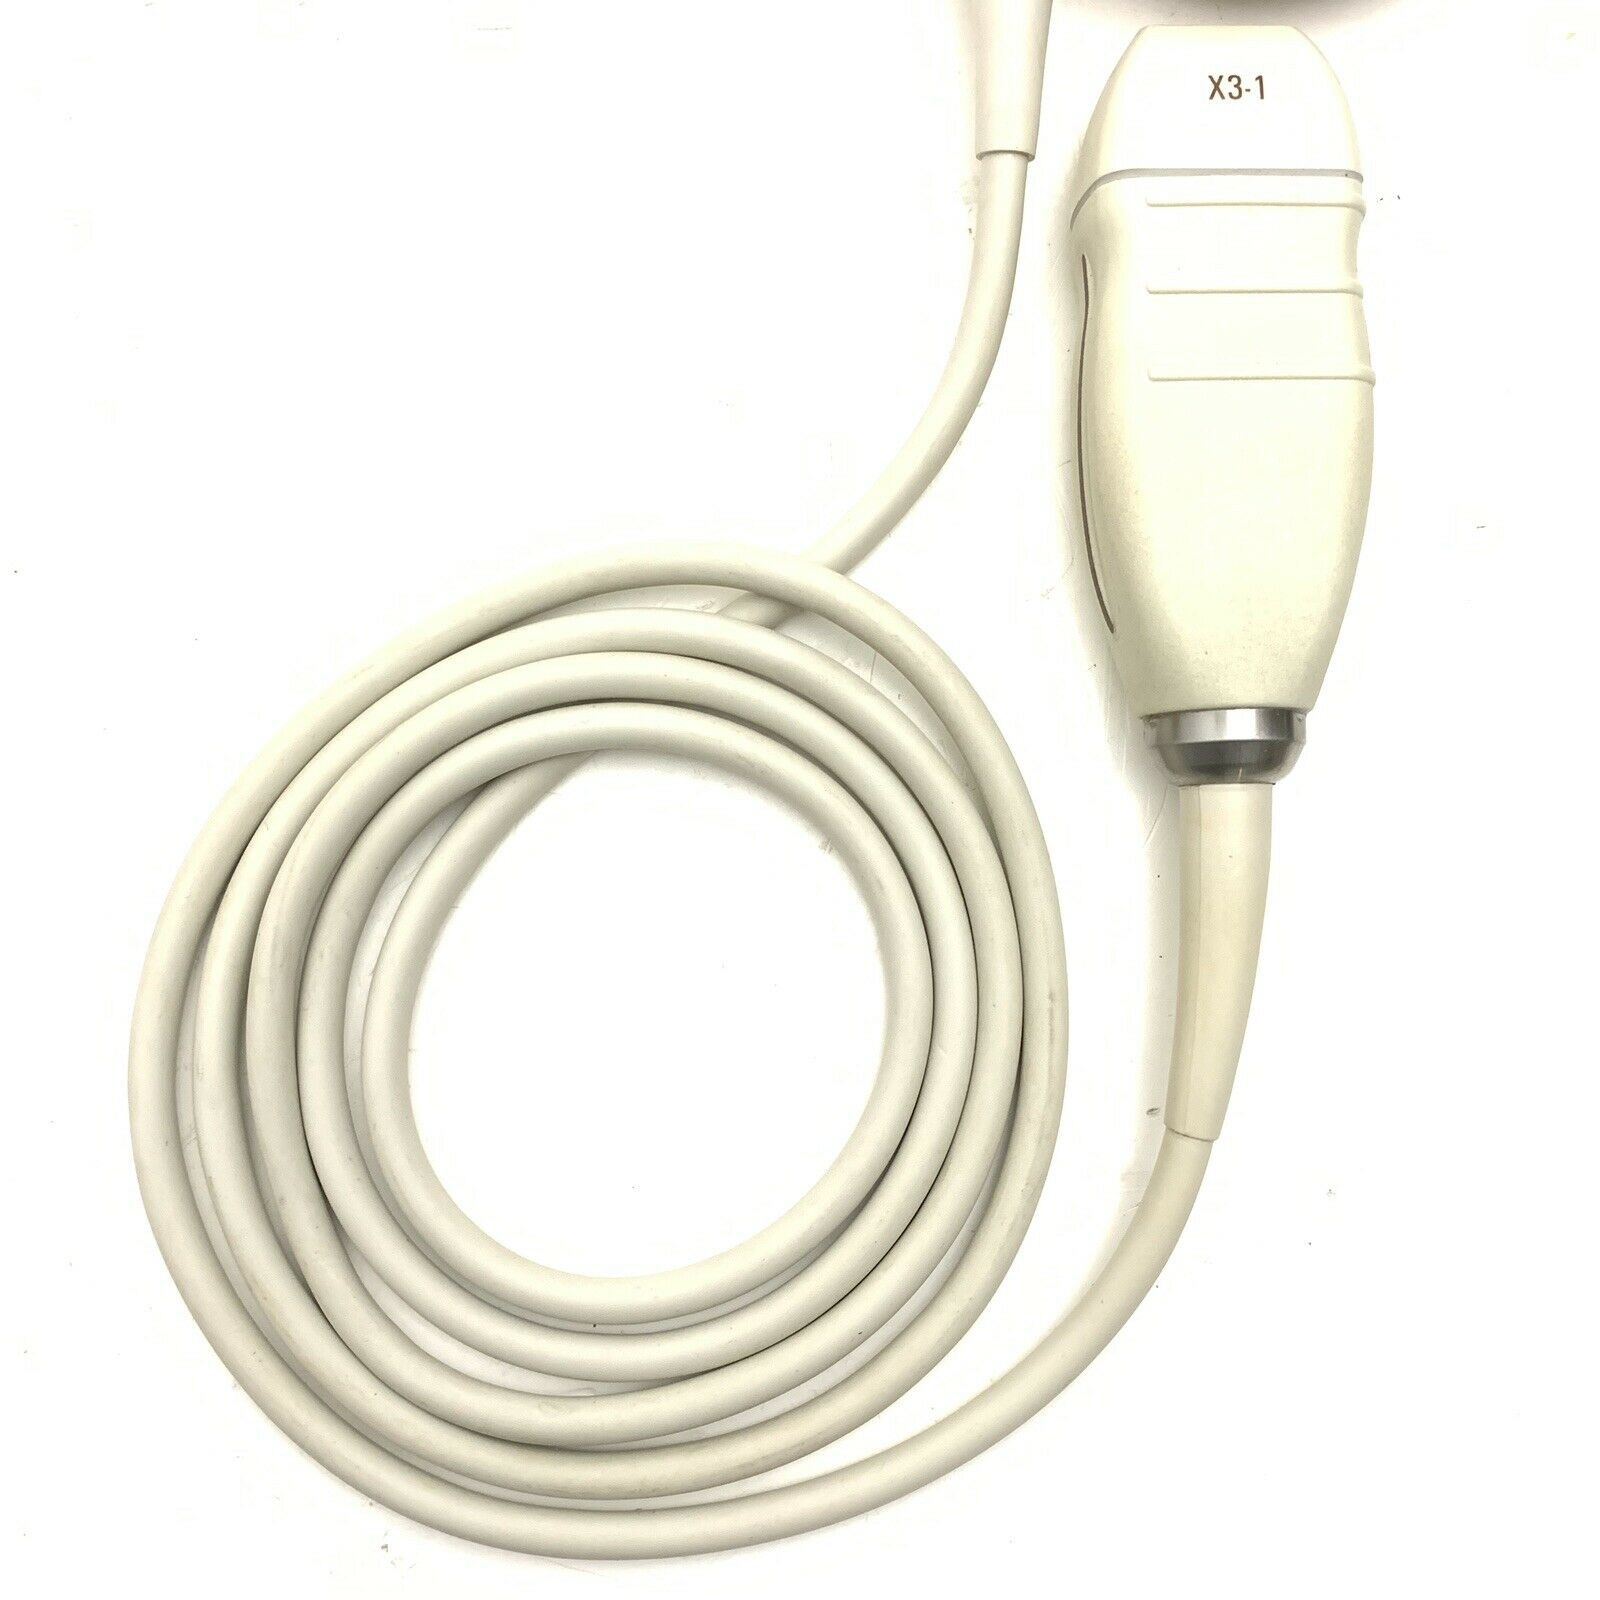 Philips X3-1 Ultrasound transducer Probe                      P/N 21715A DIAGNOSTIC ULTRASOUND MACHINES FOR SALE